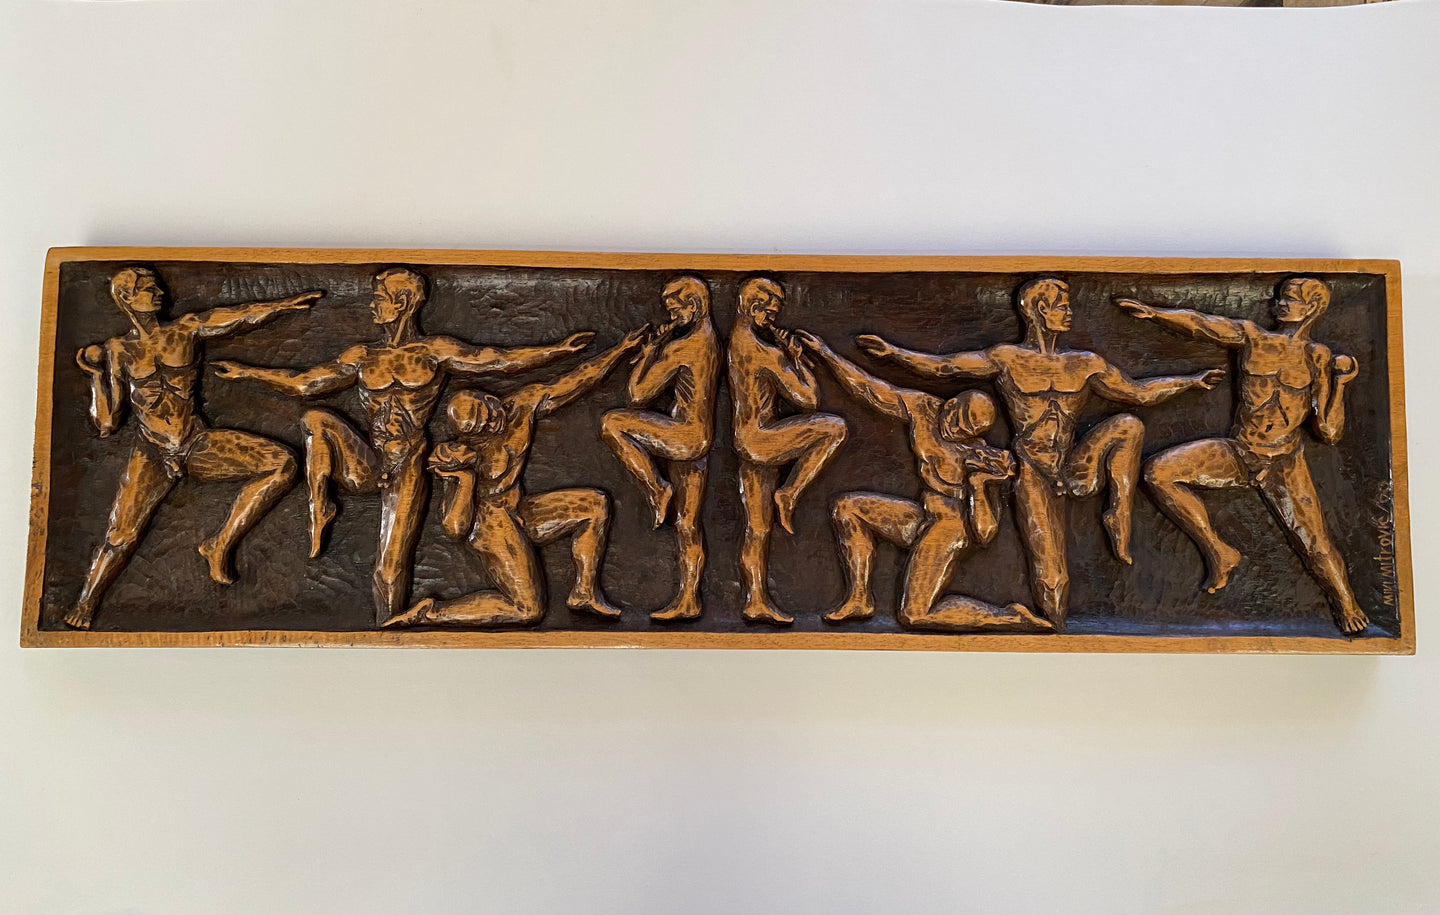 Mid Century Carved Wood Wall Art Plaque of Nude Grecian Olympic Athletes by Miki Mitrovic/63